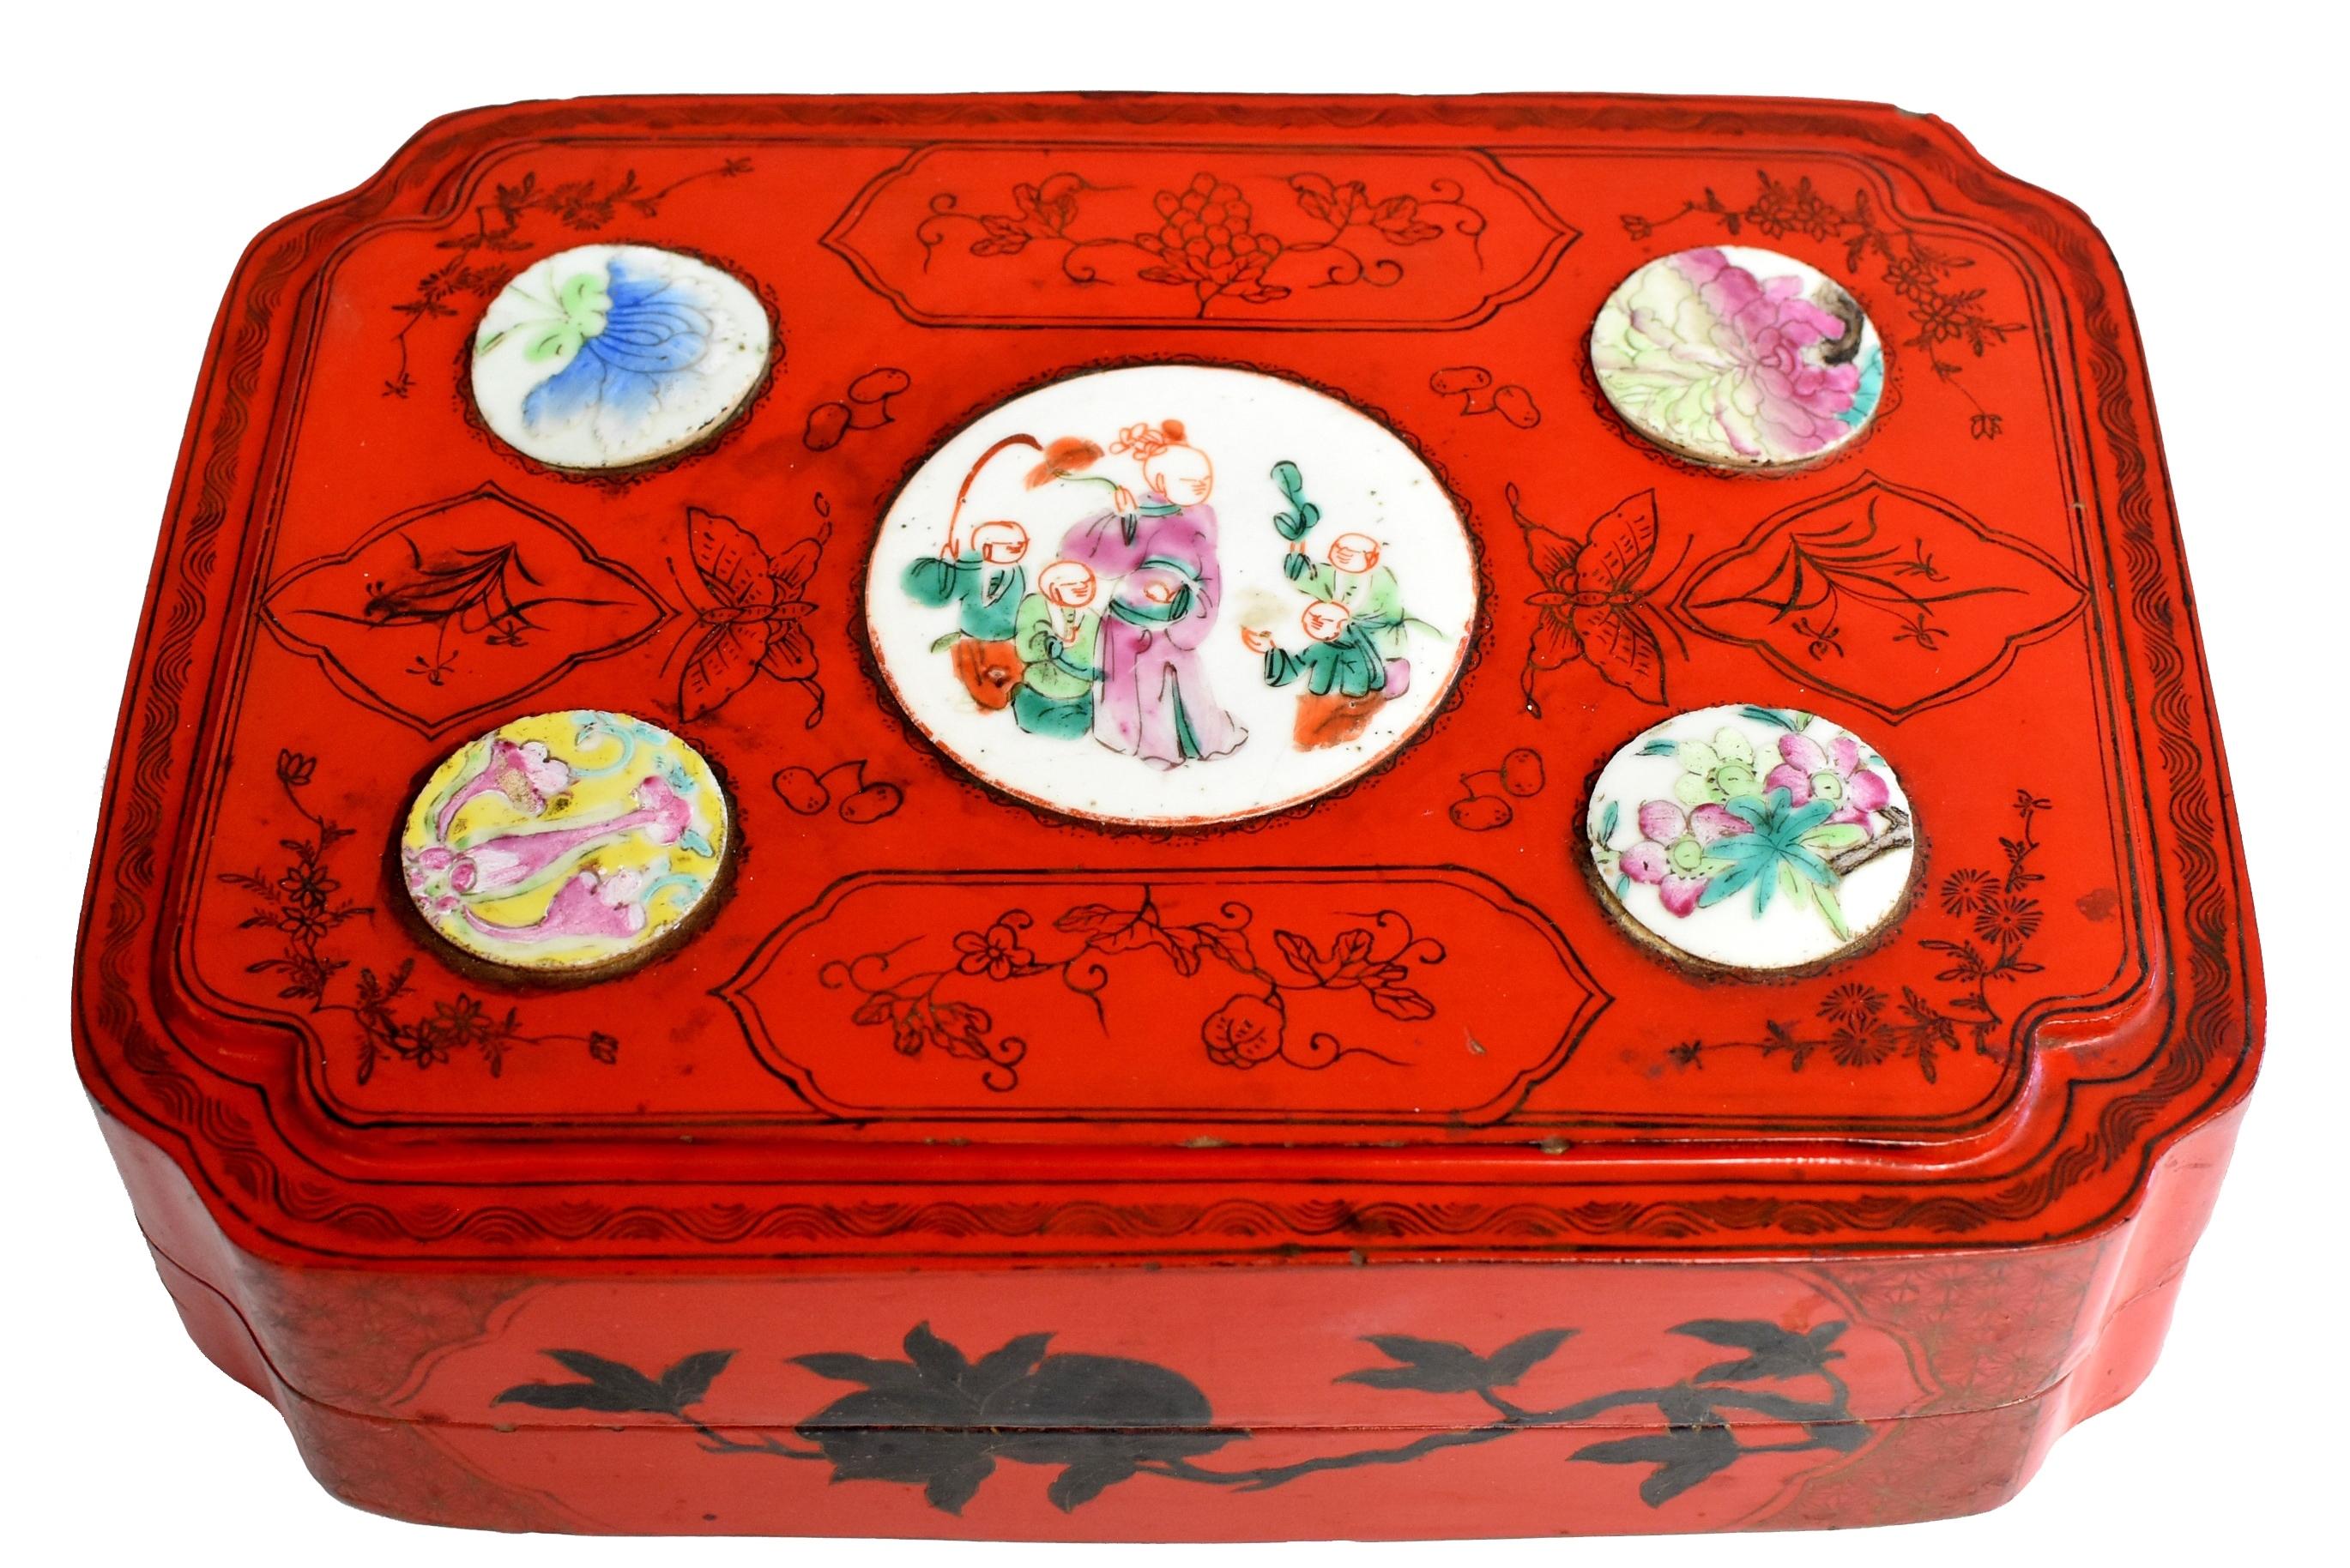 Beautiful red lacquered box feature 5 medallions of antique hand painted porcelain. Delicate ink paintings depict various flowers and butterflies which are symbols of happiness and love. The flowers of peony, lotus, lily and prunus blossom symbolize